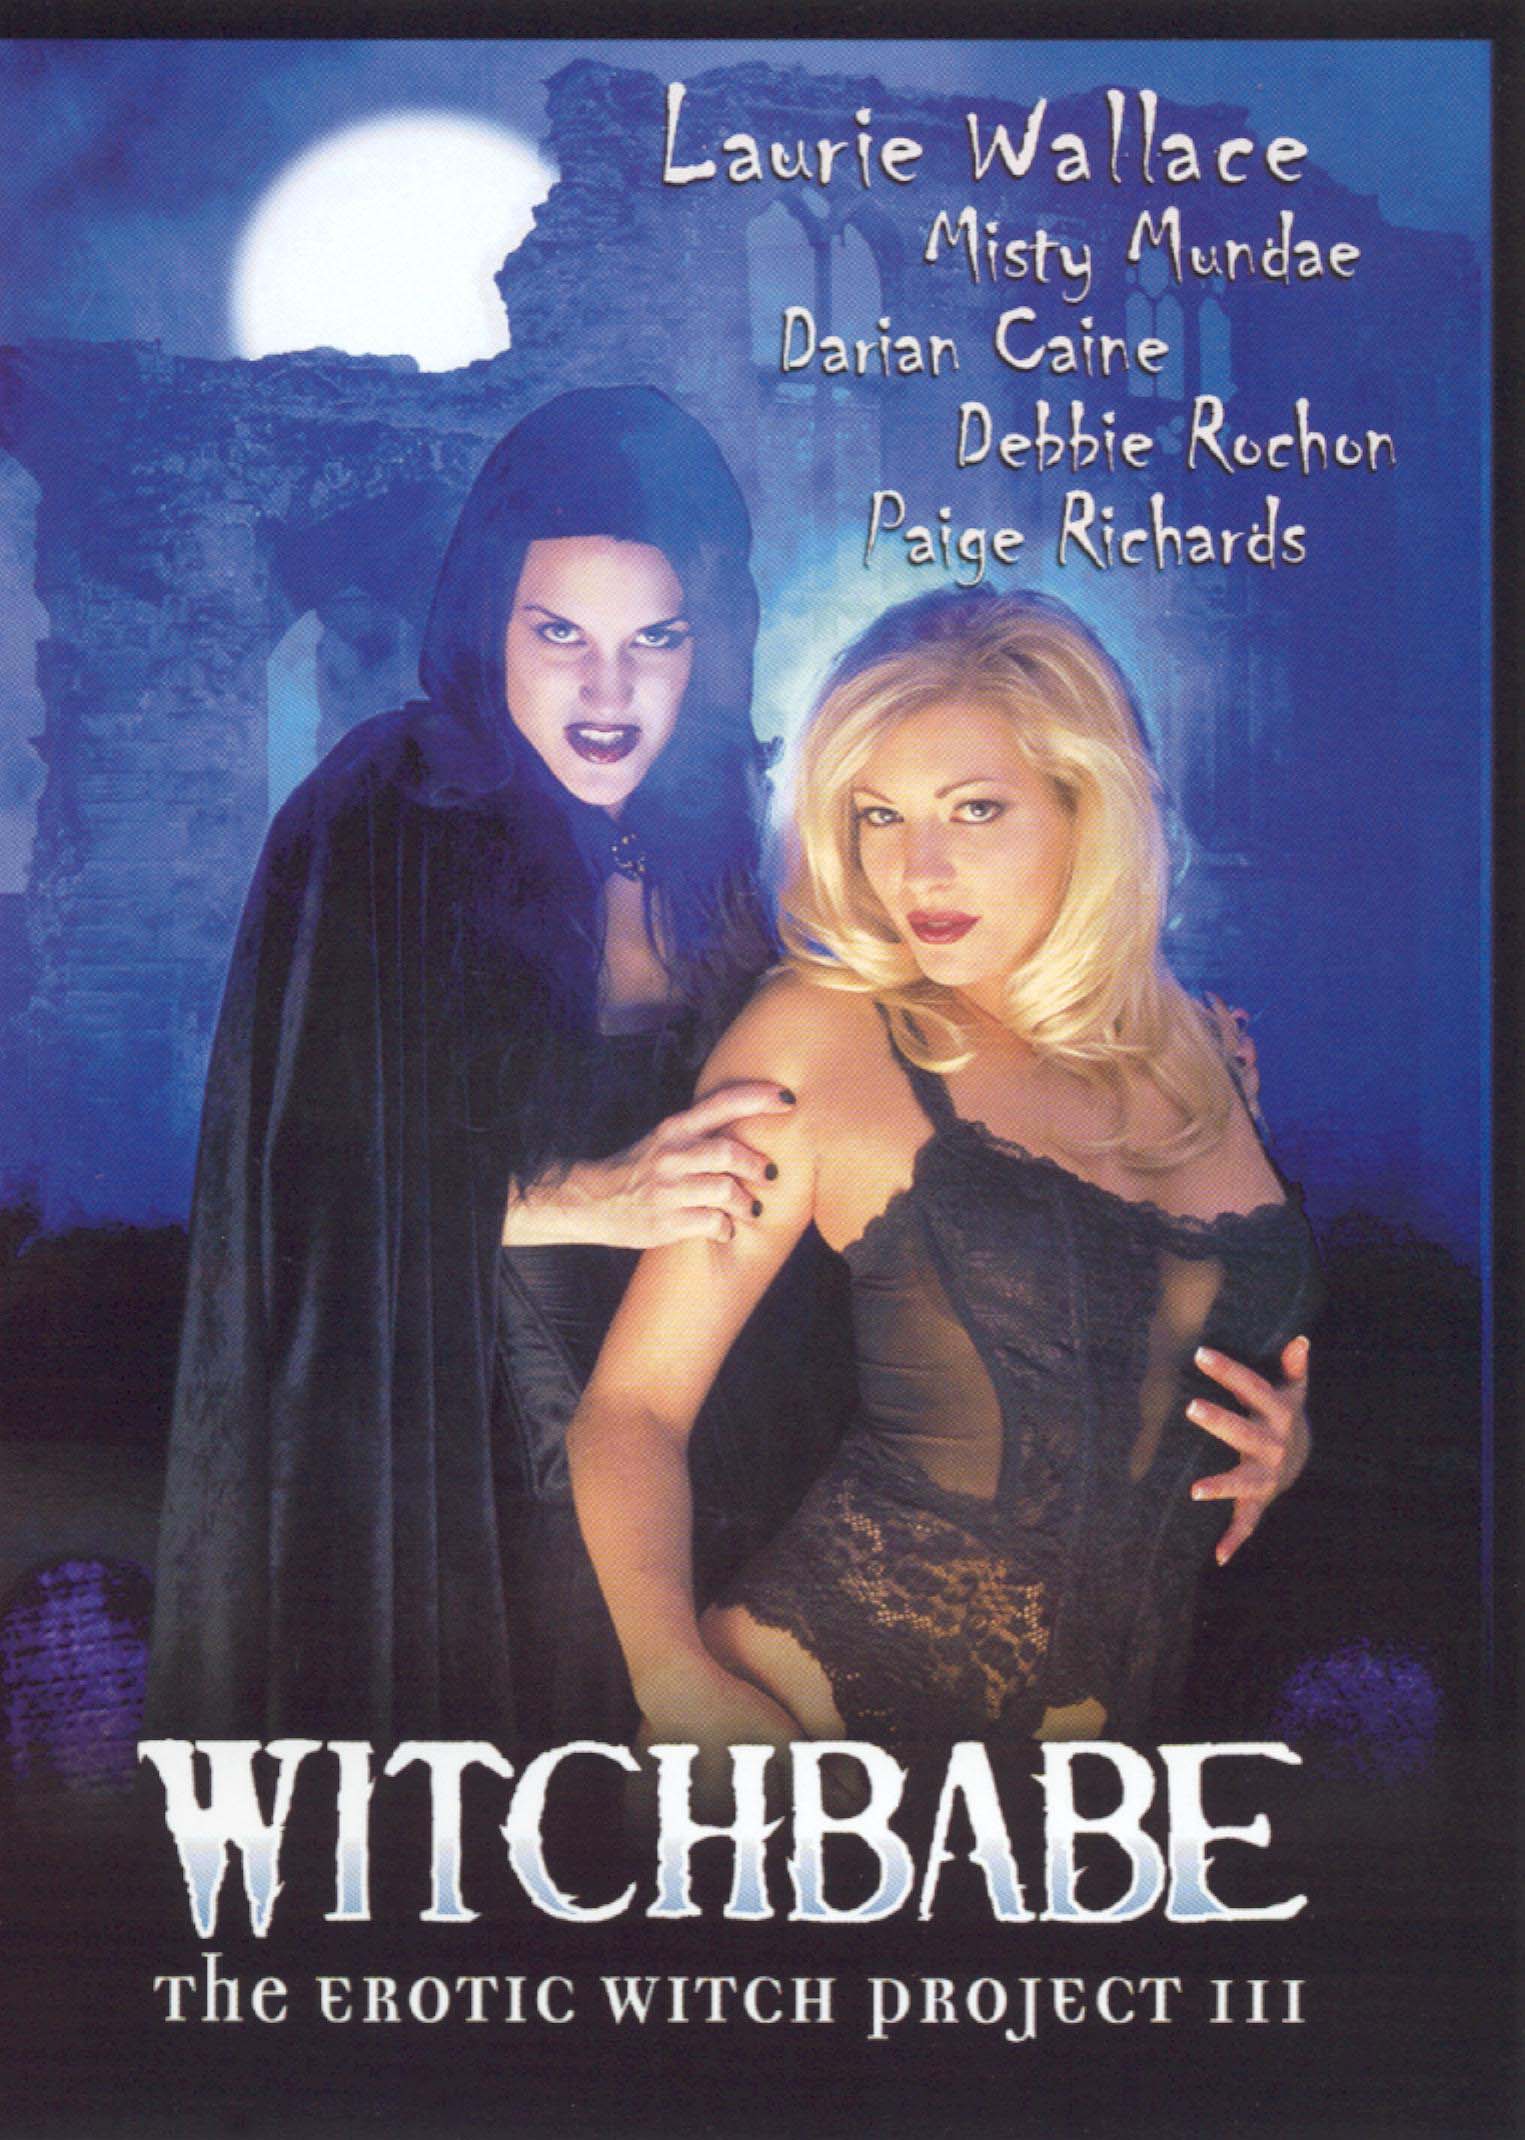 Best Buy Witchbade The Erotic Witch Project Iii Dvd 2002 9920